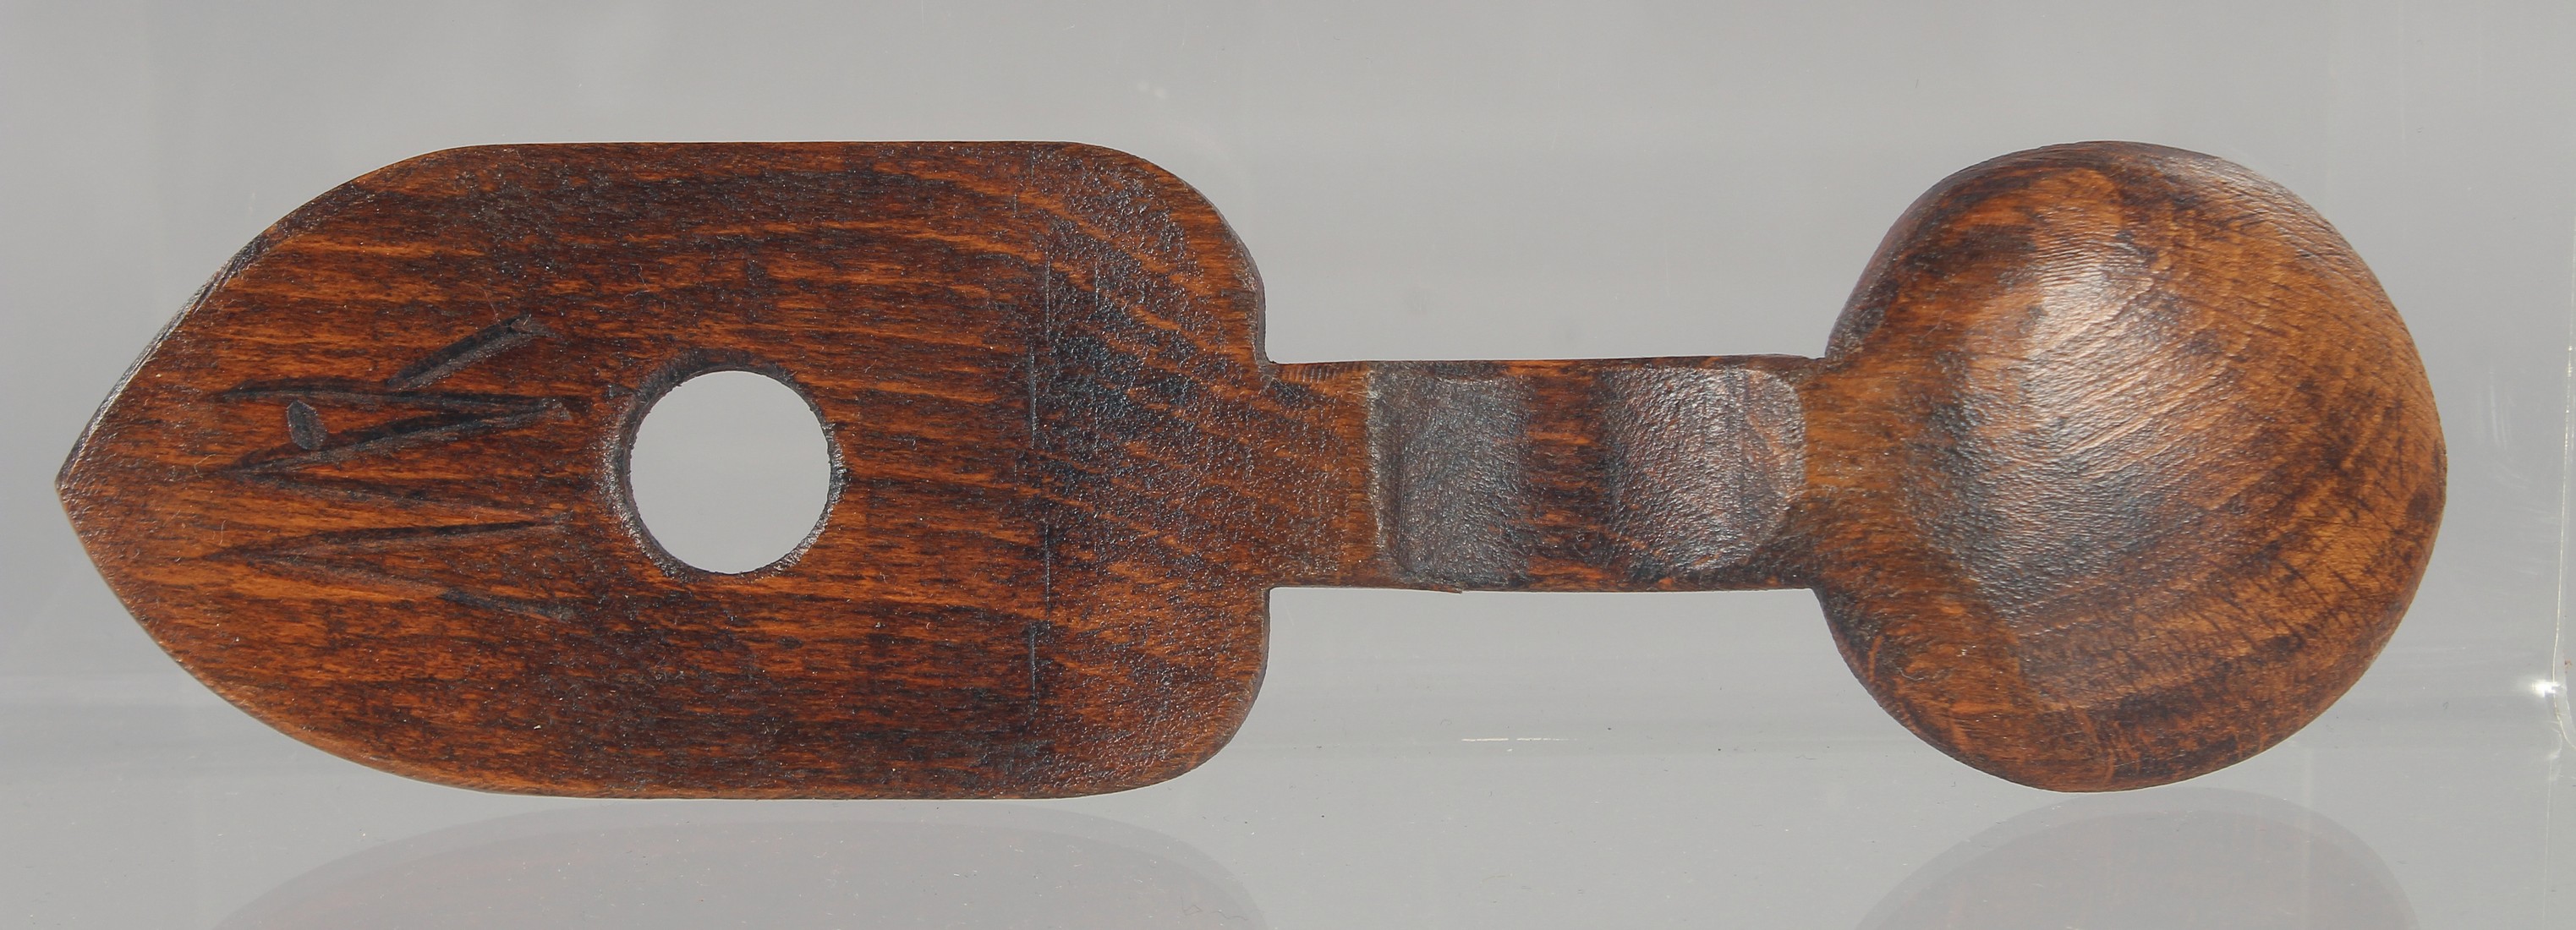 A WELSH TREEN LOVING SPOON 7ins long. - Image 2 of 3